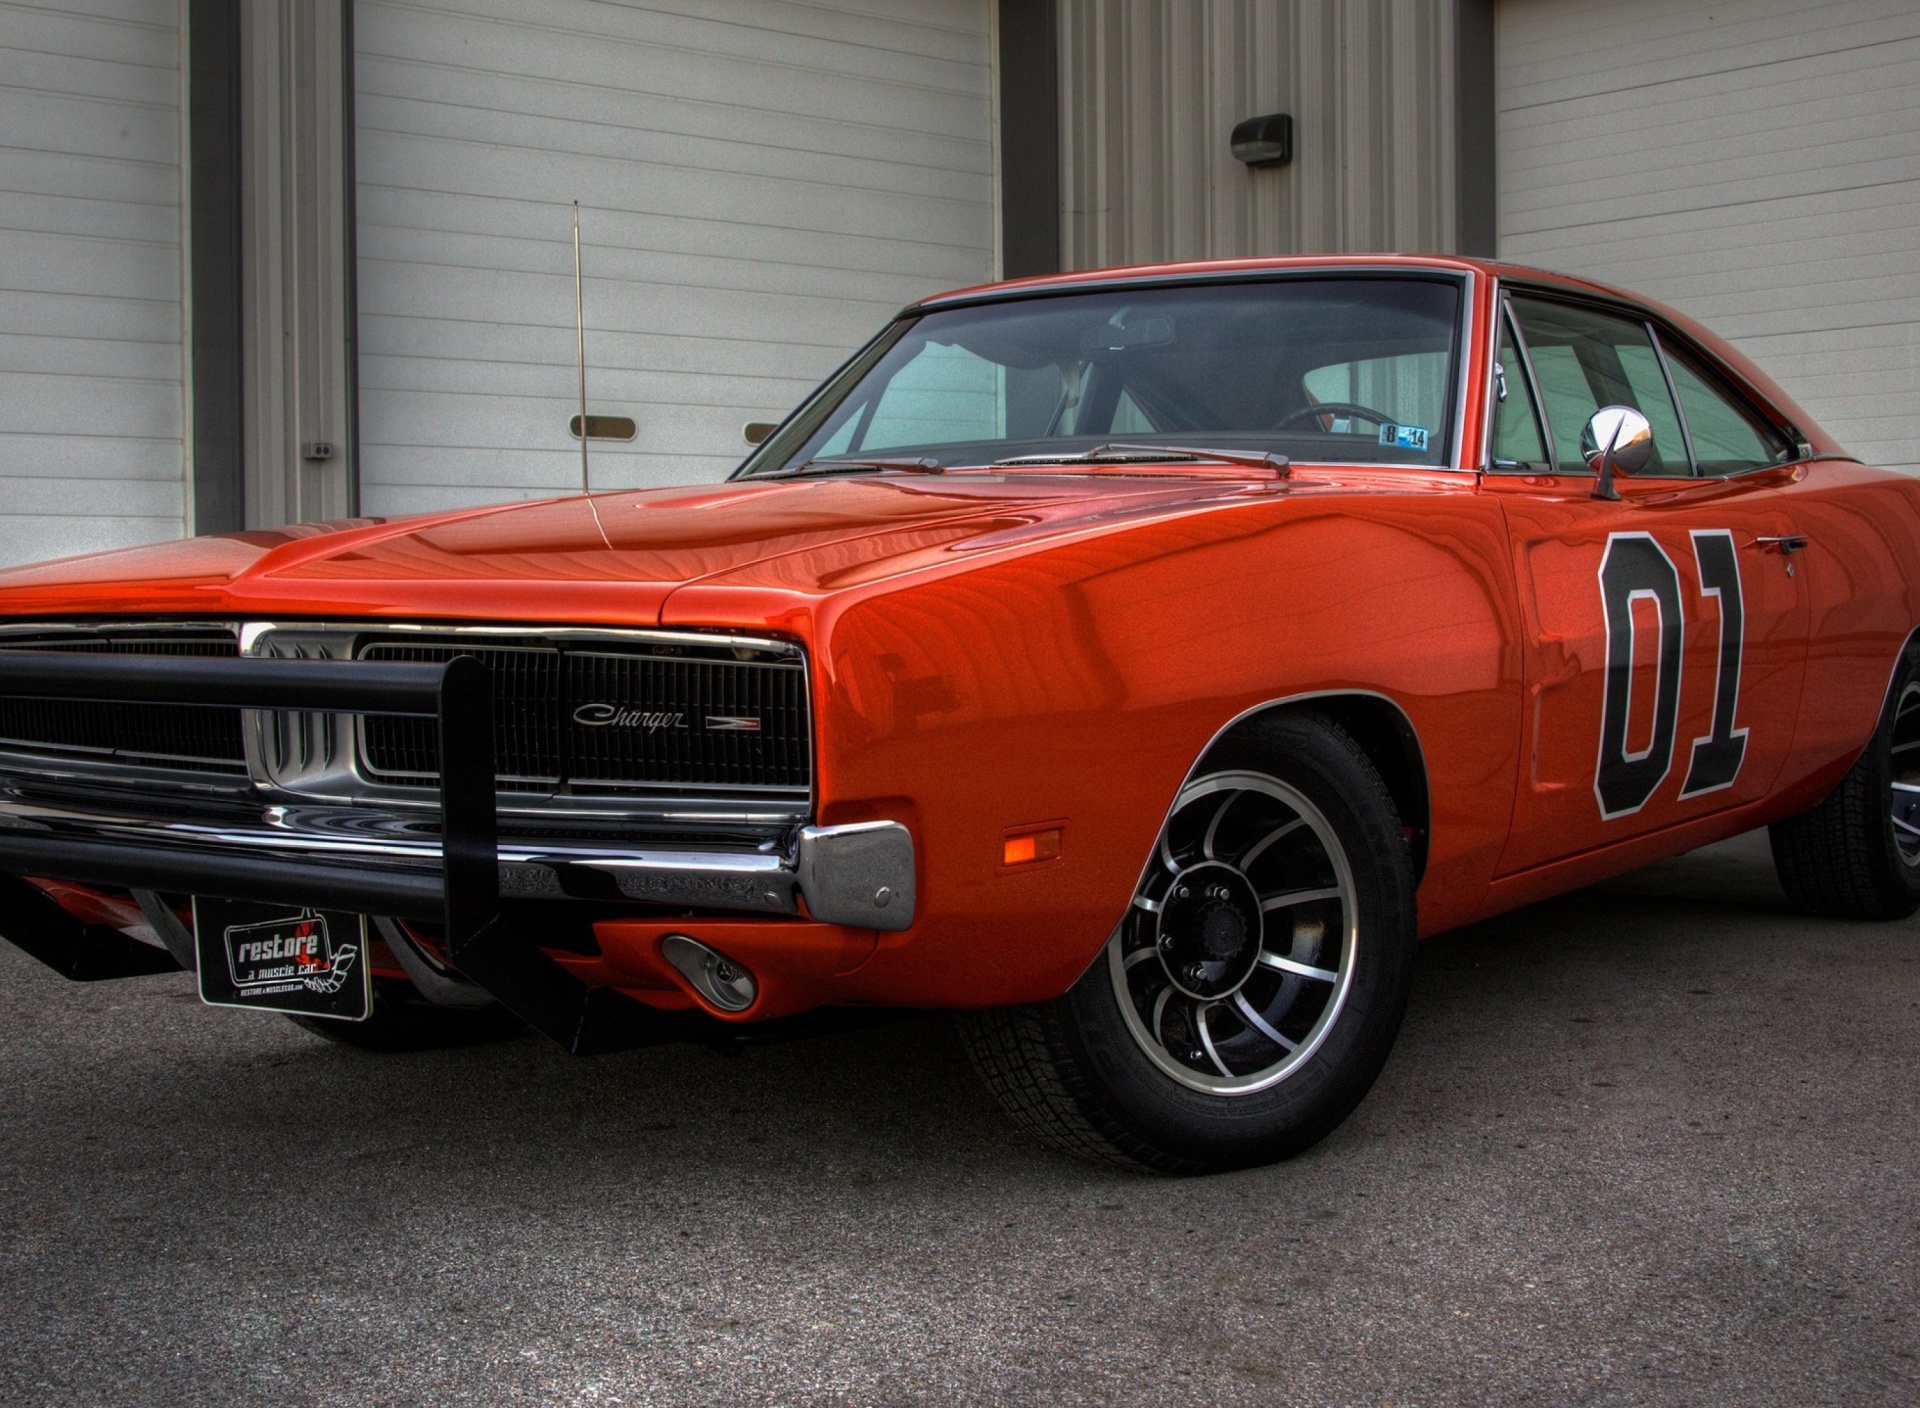 1969 Dodge Charger wallpaper 1920x1408